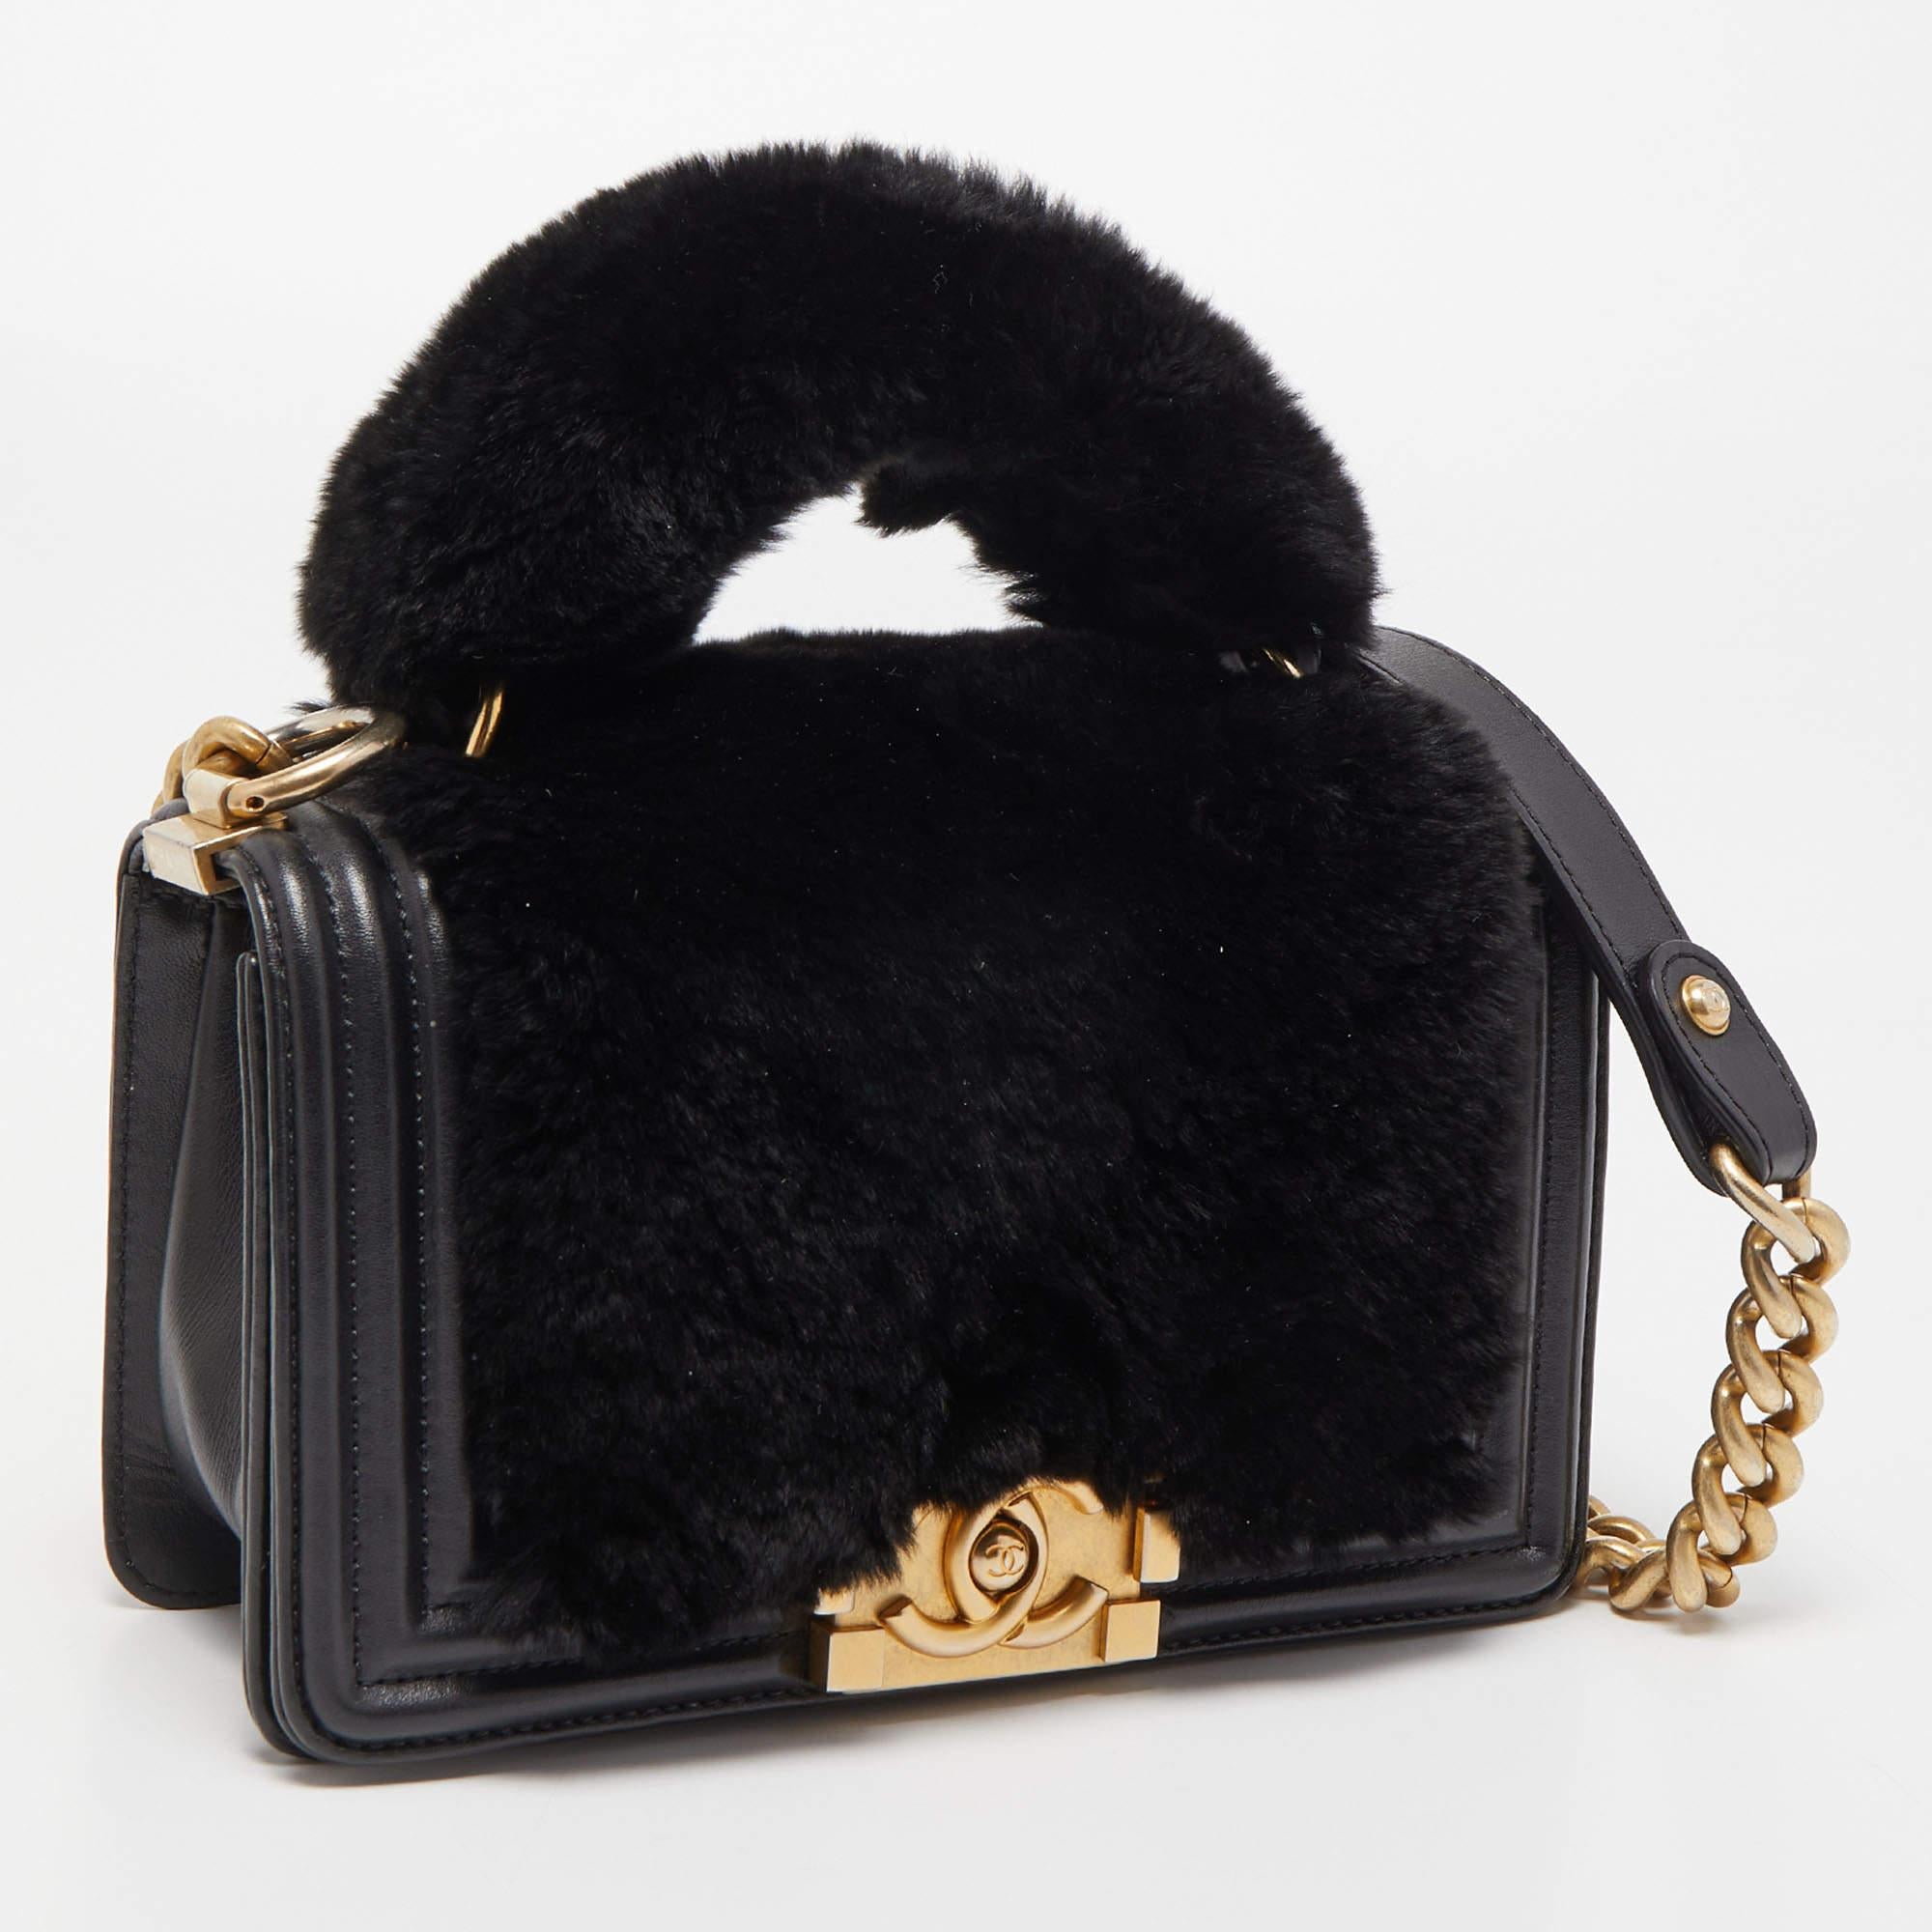 Women's Chanel Black Leather and Rabbit Fur Small Boy Flap Bag